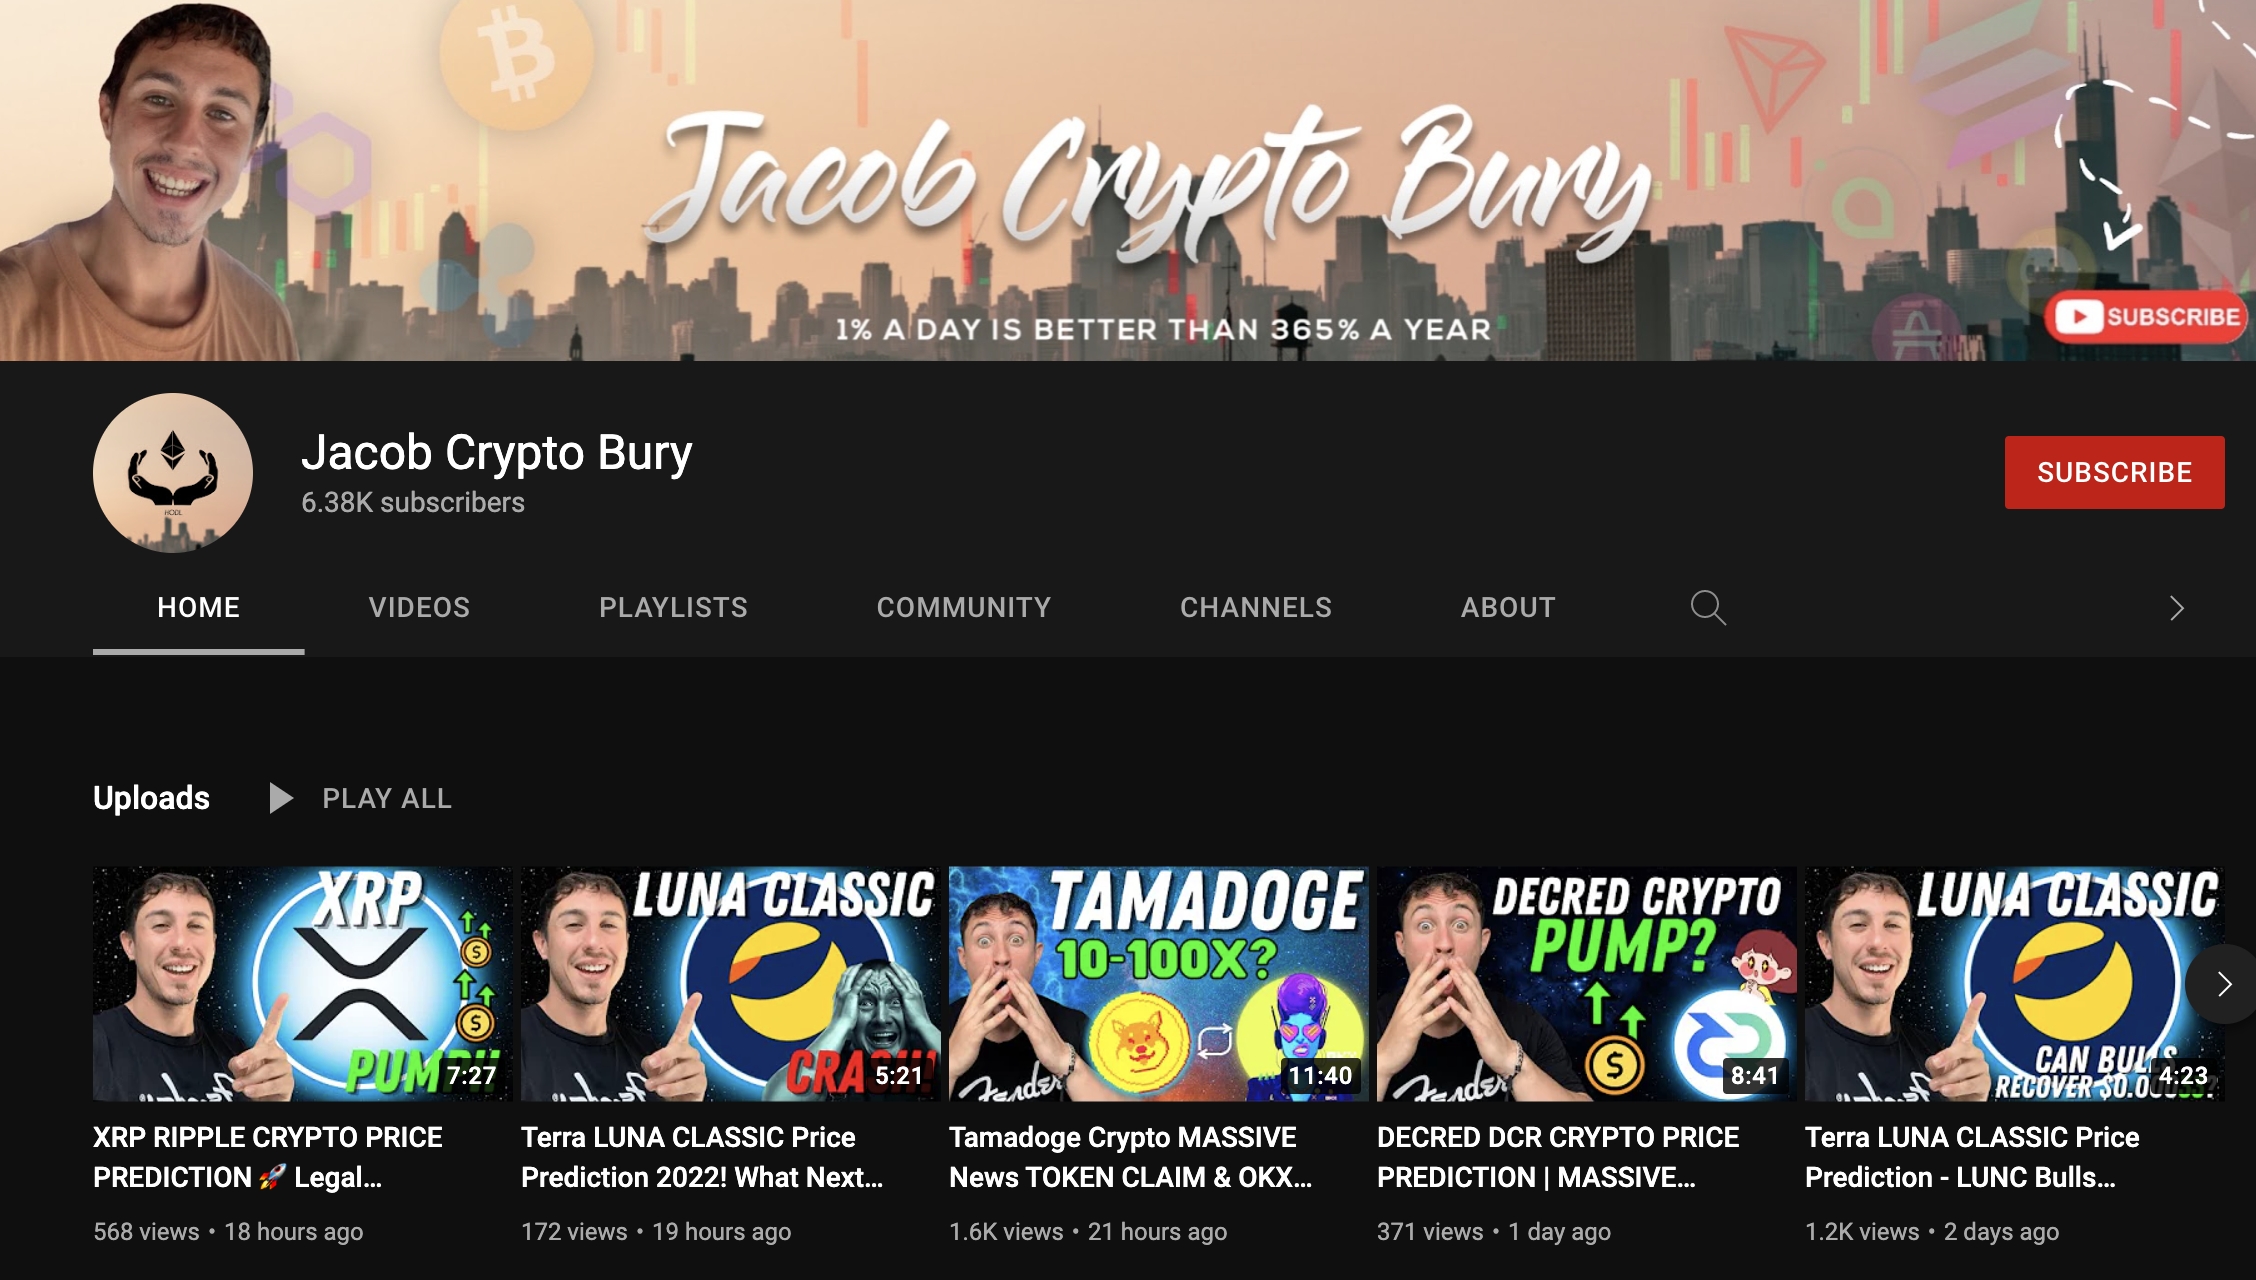 6 Best Crypto Youtube Channels to Follow in 